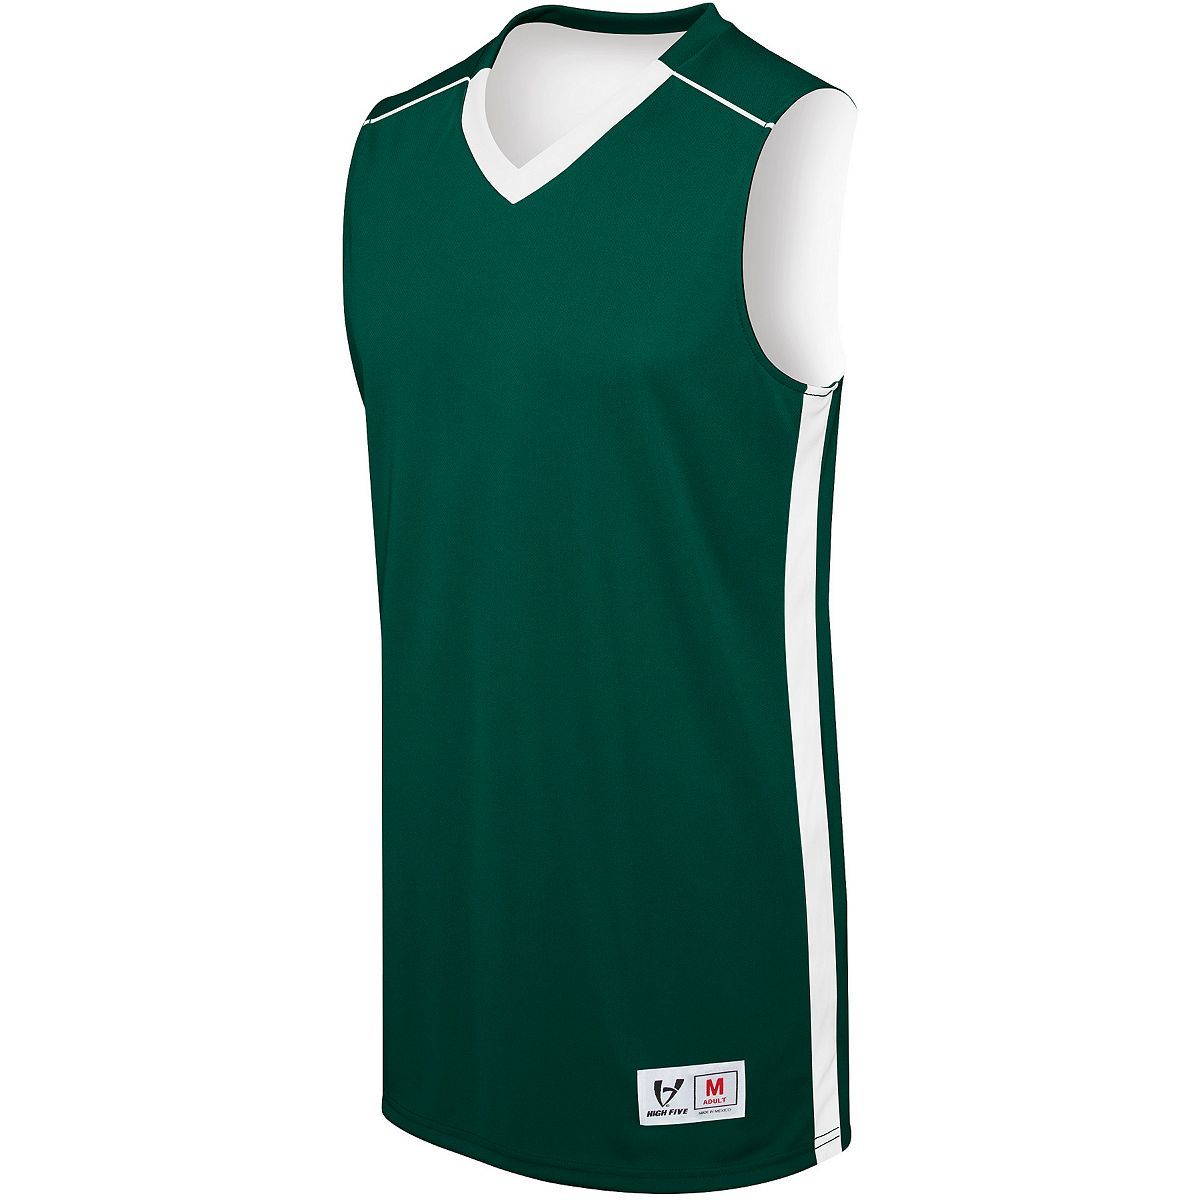 Augusta Sportswear Adult Competition Reversible Jersey in Forest/White  -Part of the Adult, Adult-Jersey, Augusta-Products, Basketball, Shirts, All-Sports, All-Sports-1 product lines at KanaleyCreations.com